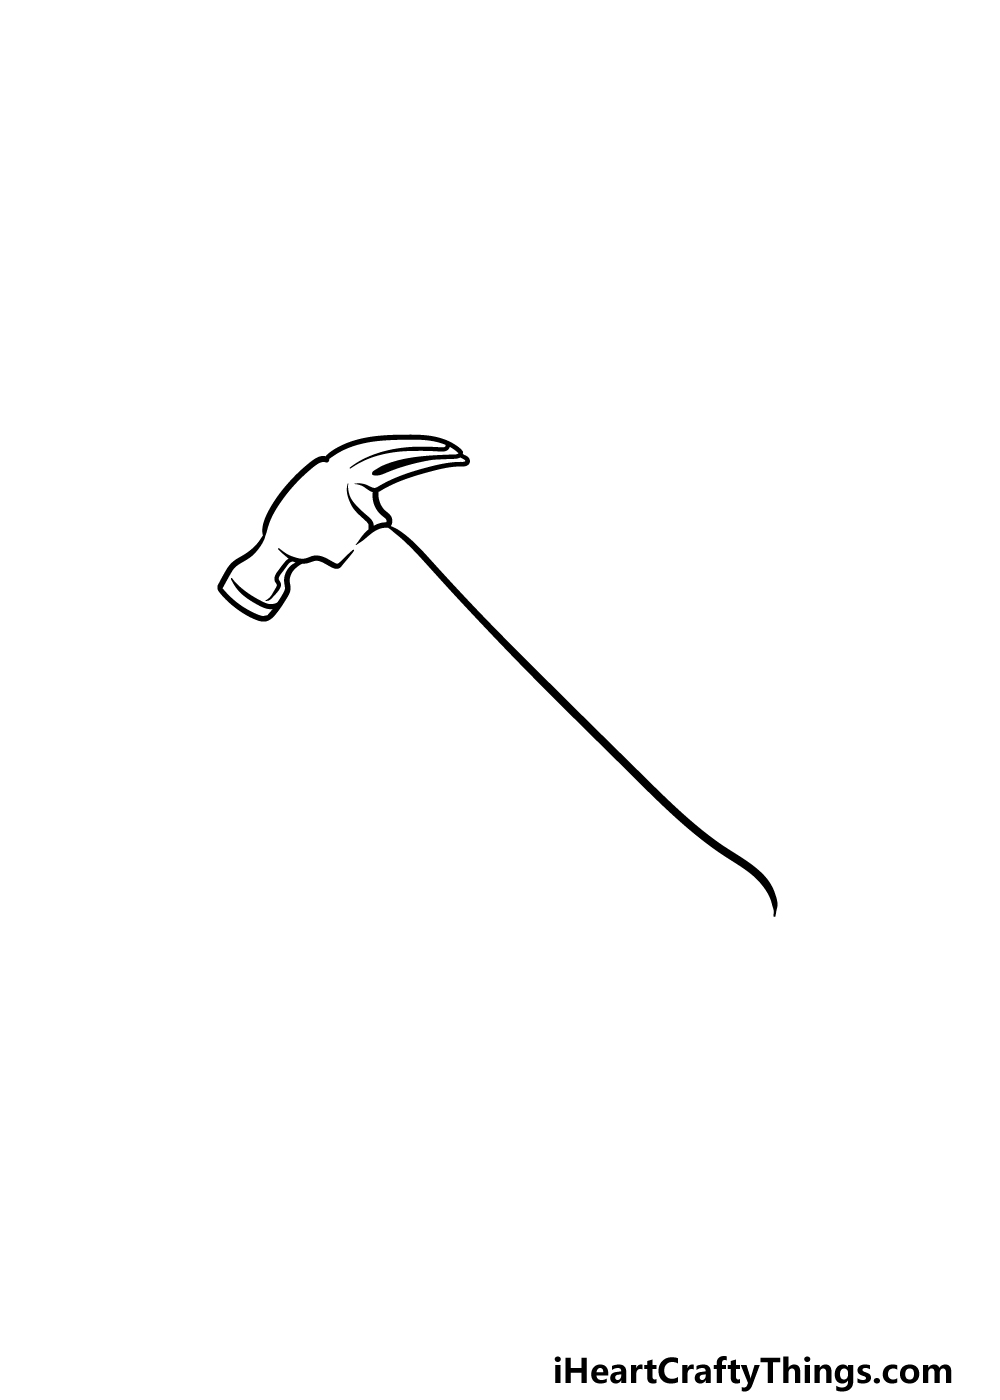 how to draw a hammer step 2